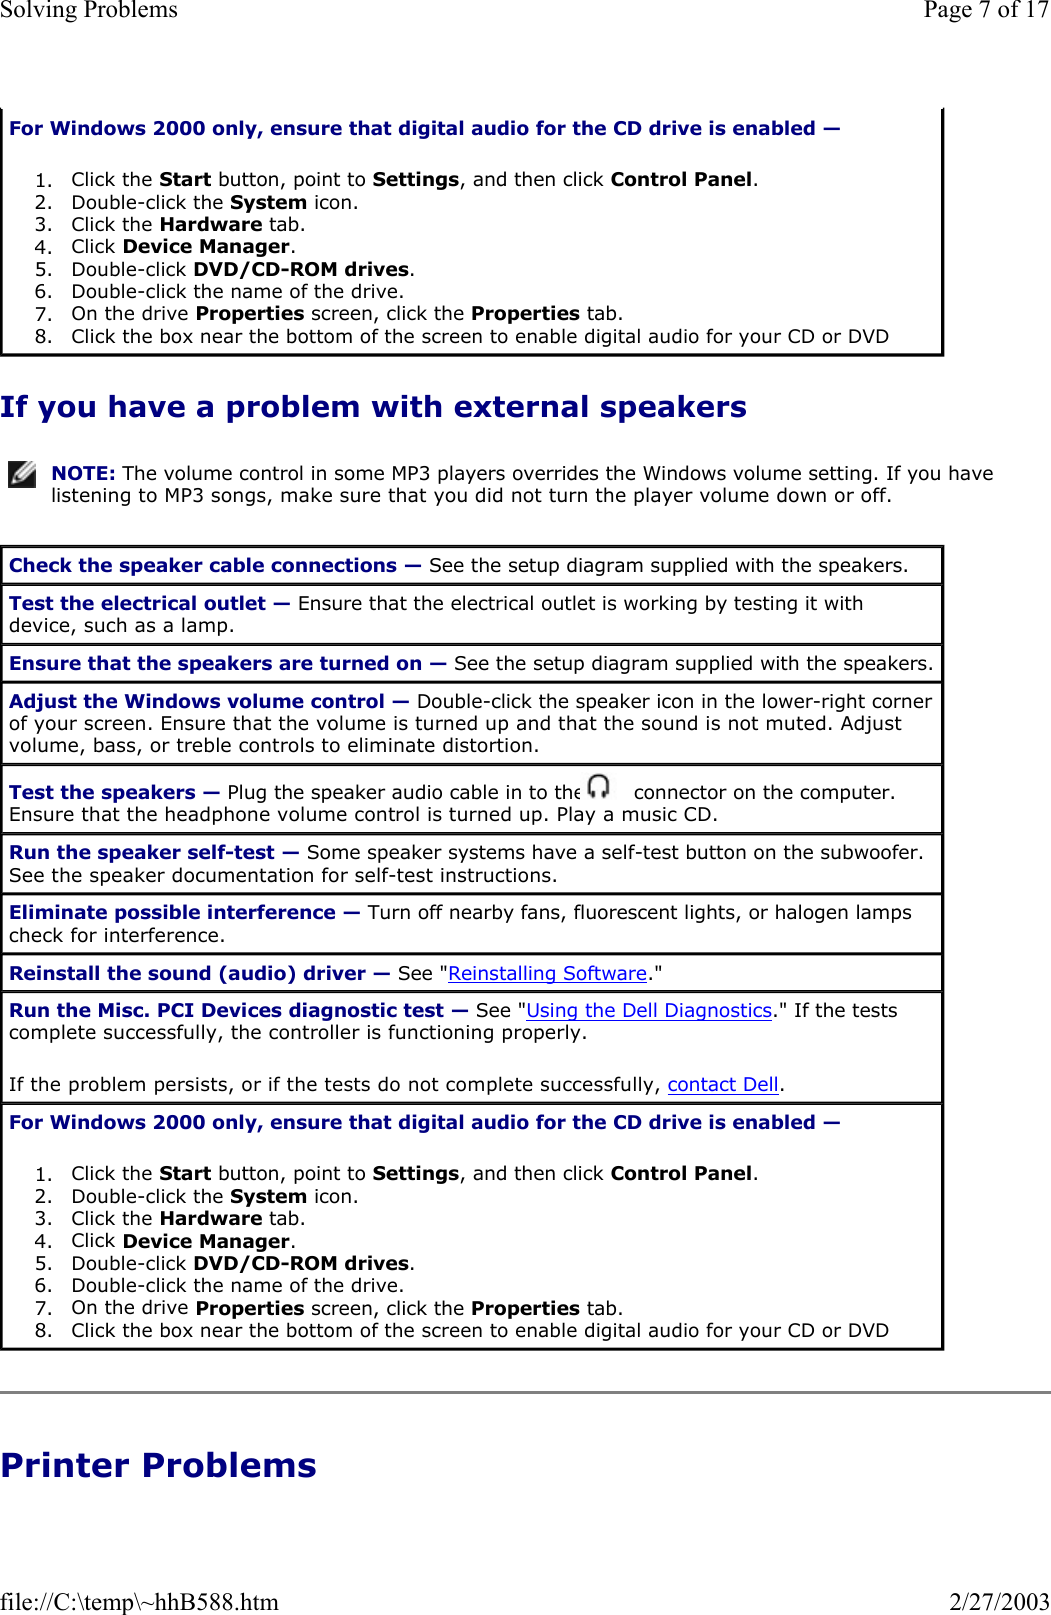 If you have a problem with external speakers Printer Problems For Windows 2000 only, ensure that digital audio for the CD drive is enabled —  1. Click the Start button, point to Settings, and then click Control Panel.  2. Double-click the System icon.  3. Click the Hardware tab.  4. Click Device Manager.  5. Double-click DVD/CD-ROM drives.  6. Double-click the name of the drive.  7. On the drive Properties screen, click the Properties tab.  8. Click the box near the bottom of the screen to enable digital audio for your CD or DVD NOTE: The volume control in some MP3 players overrides the Windows volume setting. If you have listening to MP3 songs, make sure that you did not turn the player volume down or off.Check the speaker cable connections — See the setup diagram supplied with the speakers. Test the electrical outlet — Ensure that the electrical outlet is working by testing it with device, such as a lamp. Ensure that the speakers are turned on — See the setup diagram supplied with the speakers. Adjust the Windows volume control — Double-click the speaker icon in the lower-right corner of your screen. Ensure that the volume is turned up and that the sound is not muted. Adjust volume, bass, or treble controls to eliminate distortion. Test the speakers — Plug the speaker audio cable in to the   connector on the computer. Ensure that the headphone volume control is turned up. Play a music CD. Run the speaker self-test — Some speaker systems have a self-test button on the subwoofer. See the speaker documentation for self-test instructions.  Eliminate possible interference — Turn off nearby fans, fluorescent lights, or halogen lamps check for interference. Reinstall the sound (audio) driver — See &quot;Reinstalling Software.&quot; Run the Misc. PCI Devices diagnostic test — See &quot;Using the Dell Diagnostics.&quot; If the tests complete successfully, the controller is functioning properly. If the problem persists, or if the tests do not complete successfully, contact Dell. For Windows 2000 only, ensure that digital audio for the CD drive is enabled —  1. Click the Start button, point to Settings, and then click Control Panel.  2. Double-click the System icon.  3. Click the Hardware tab.  4. Click Device Manager.  5. Double-click DVD/CD-ROM drives.  6. Double-click the name of the drive.  7. On the drive Properties screen, click the Properties tab.  8. Click the box near the bottom of the screen to enable digital audio for your CD or DVD Page 7 of 17Solving Problems2/27/2003file://C:\temp\~hhB588.htm